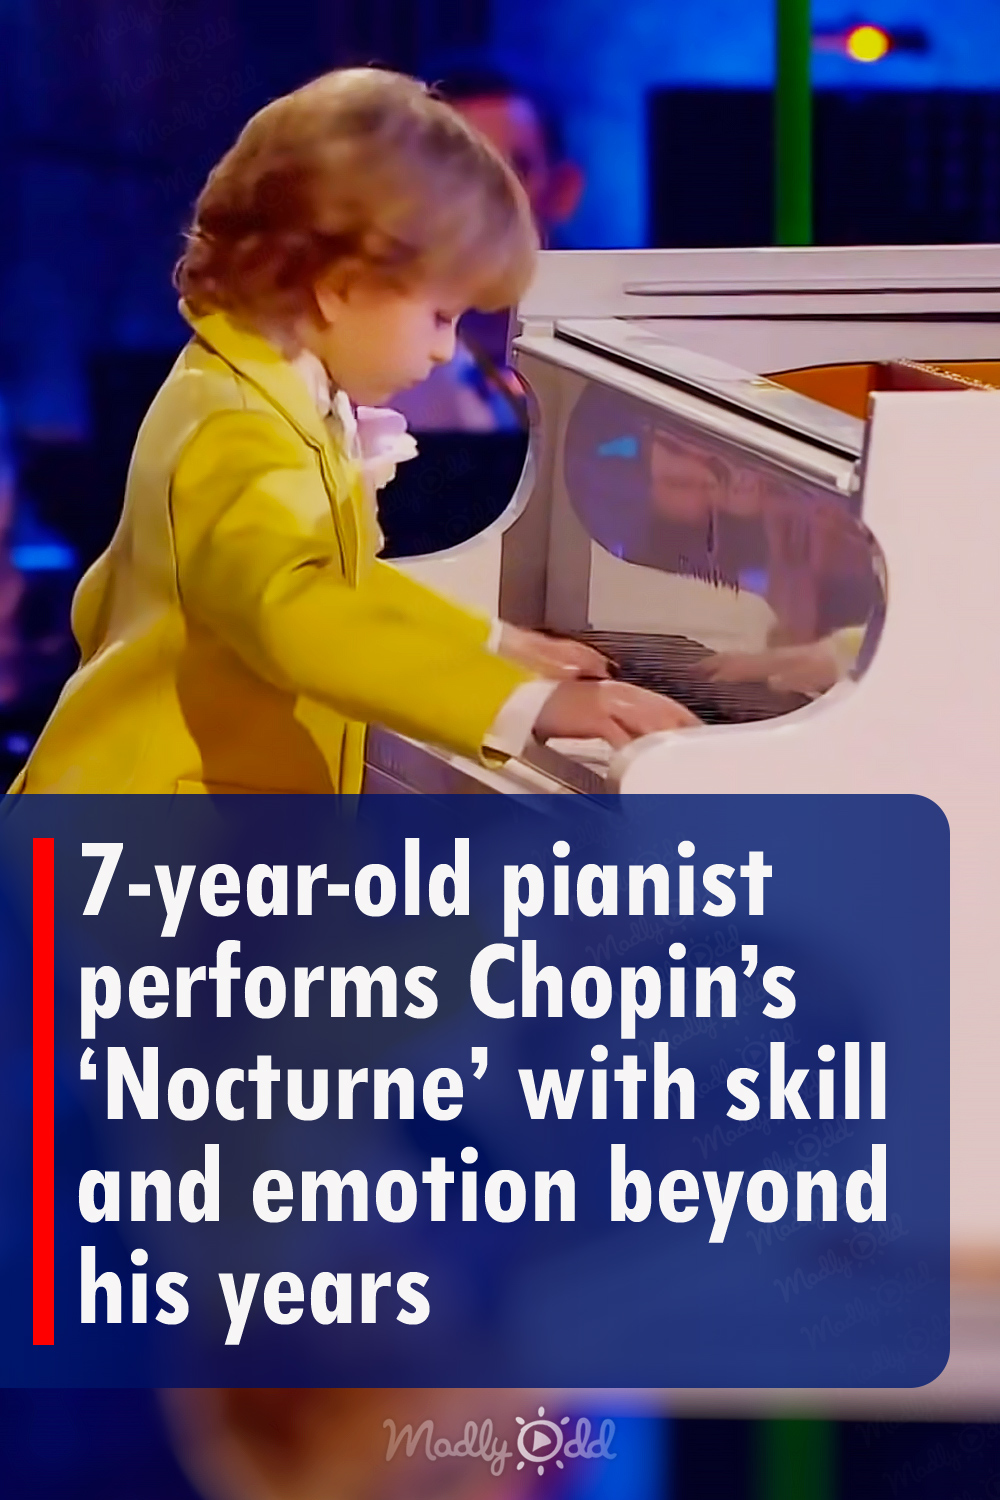 7-year-old pianist performs Chopin’s ‘Nocturne’ with skill and emotion beyond his years